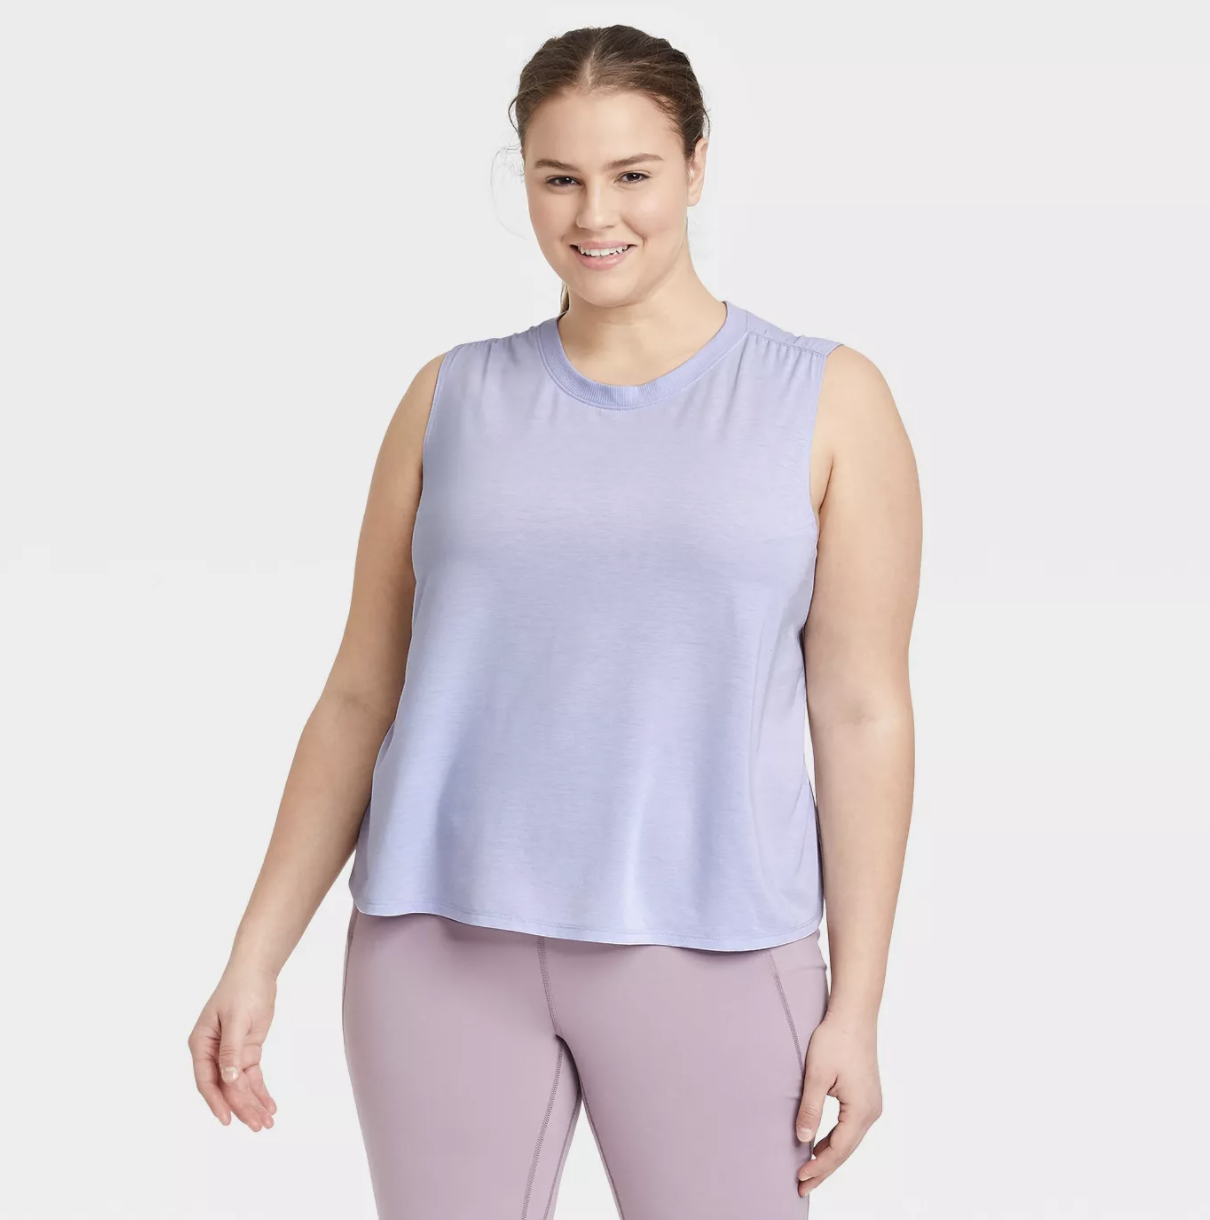 Model is wearing a lavender tank top and light pink pants